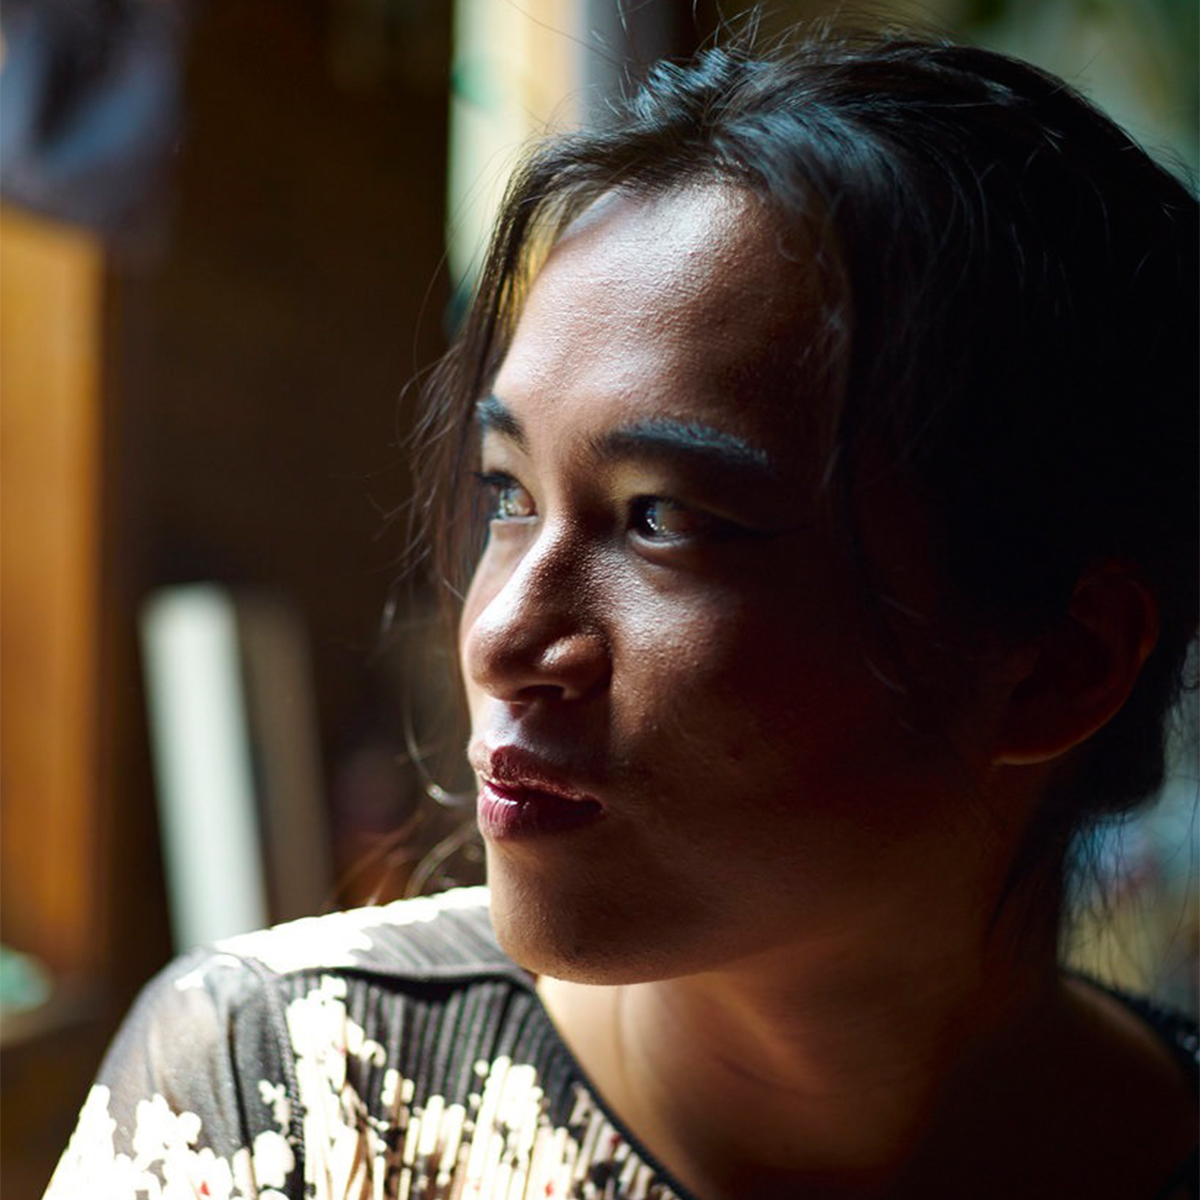 Kai Cheng Thom color portrait. Kai Cheng is in part profile and is looking off to the left, to what appears to be a light source, maybe a window. They are wearing a silk top with pleats and gold design.